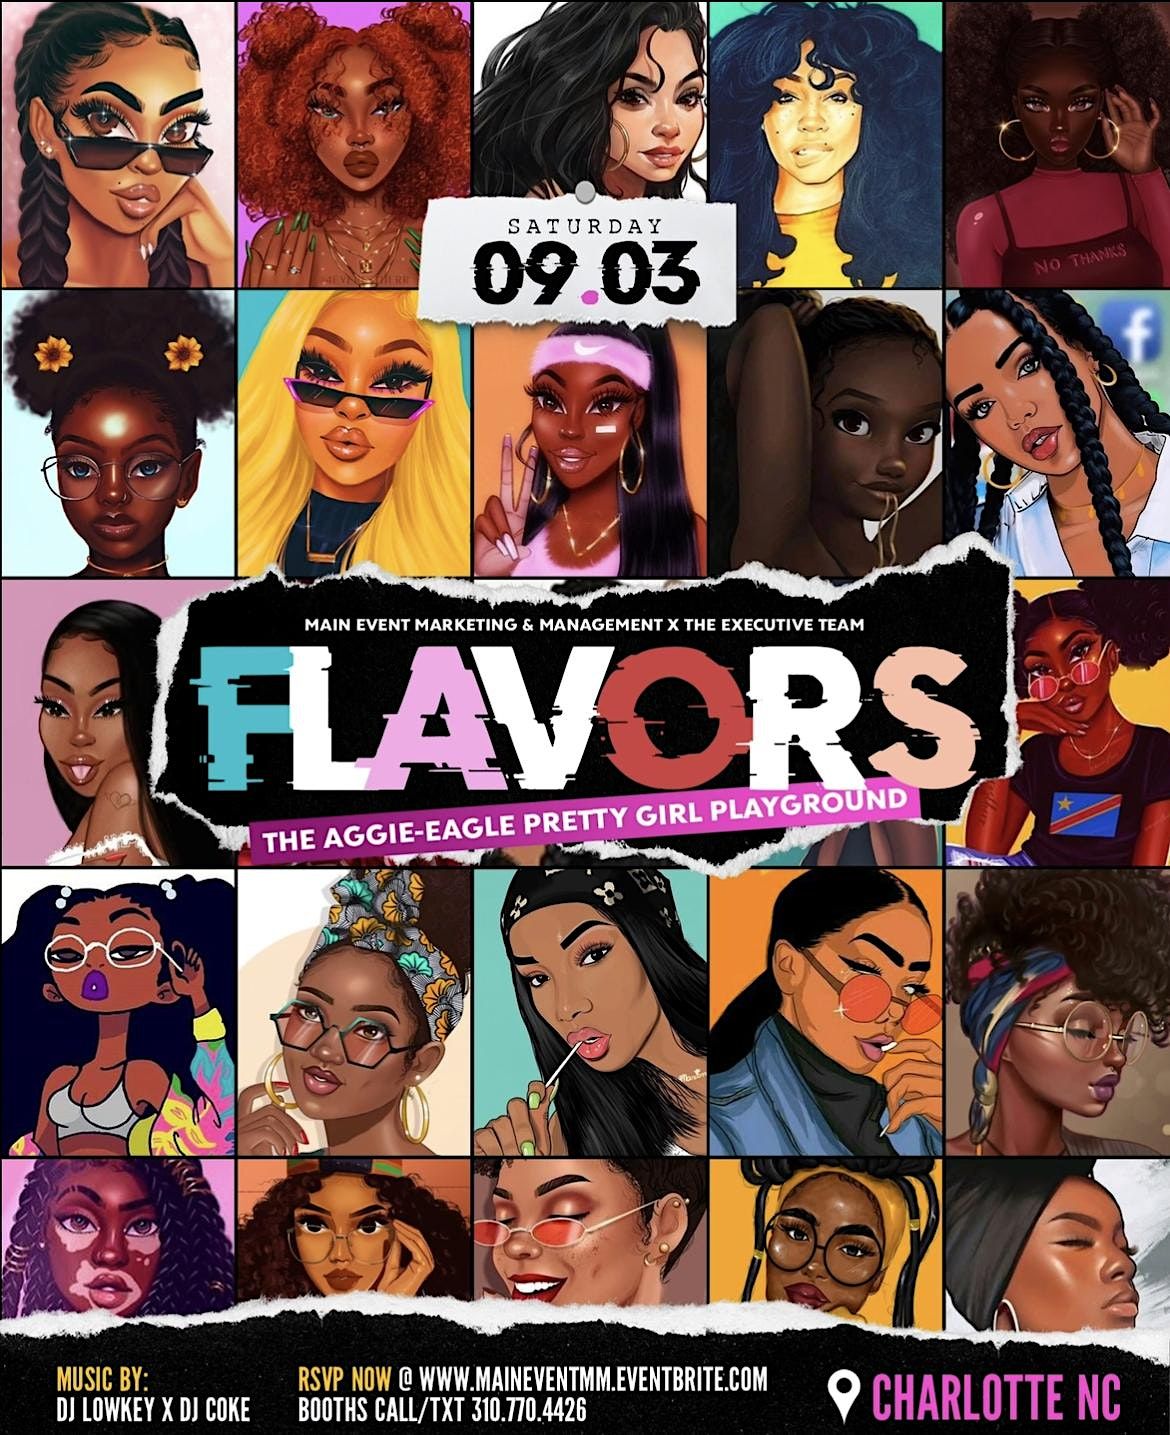 FLAVORS || THE AGGIE-EAGLE PRETTY GIRL PLAYGROUND